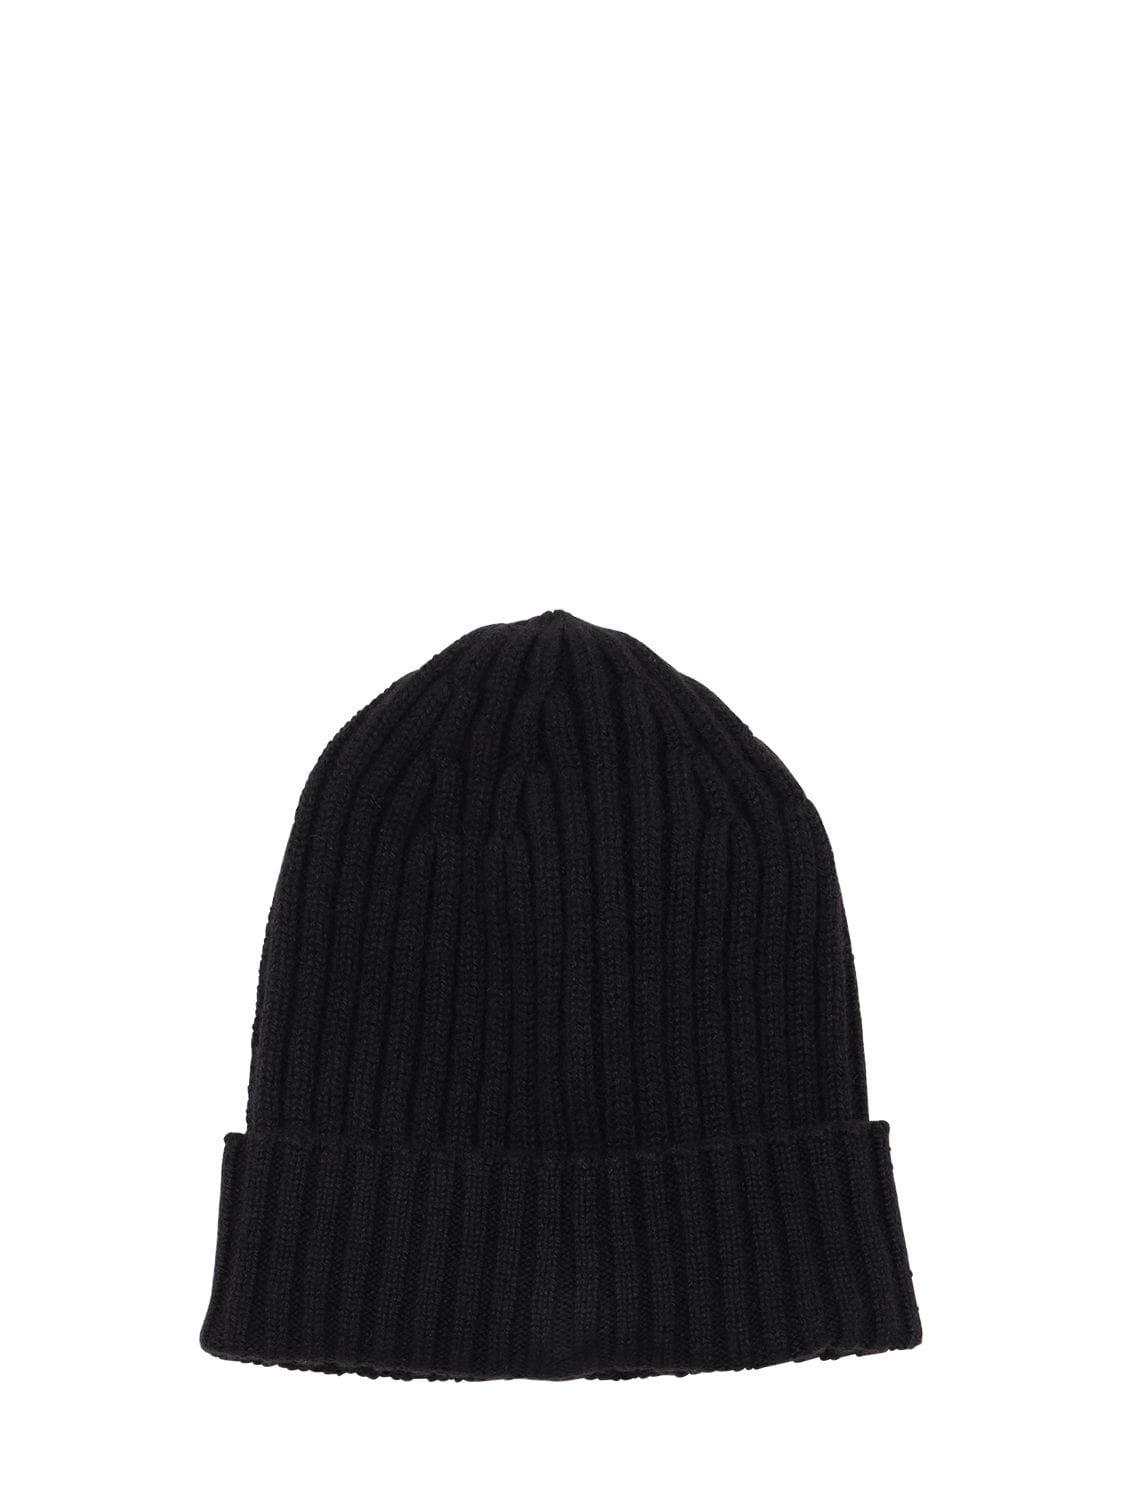 Piacenza Cashmere Cashmere Knit Fisherman Beanie in Black for Men - Lyst